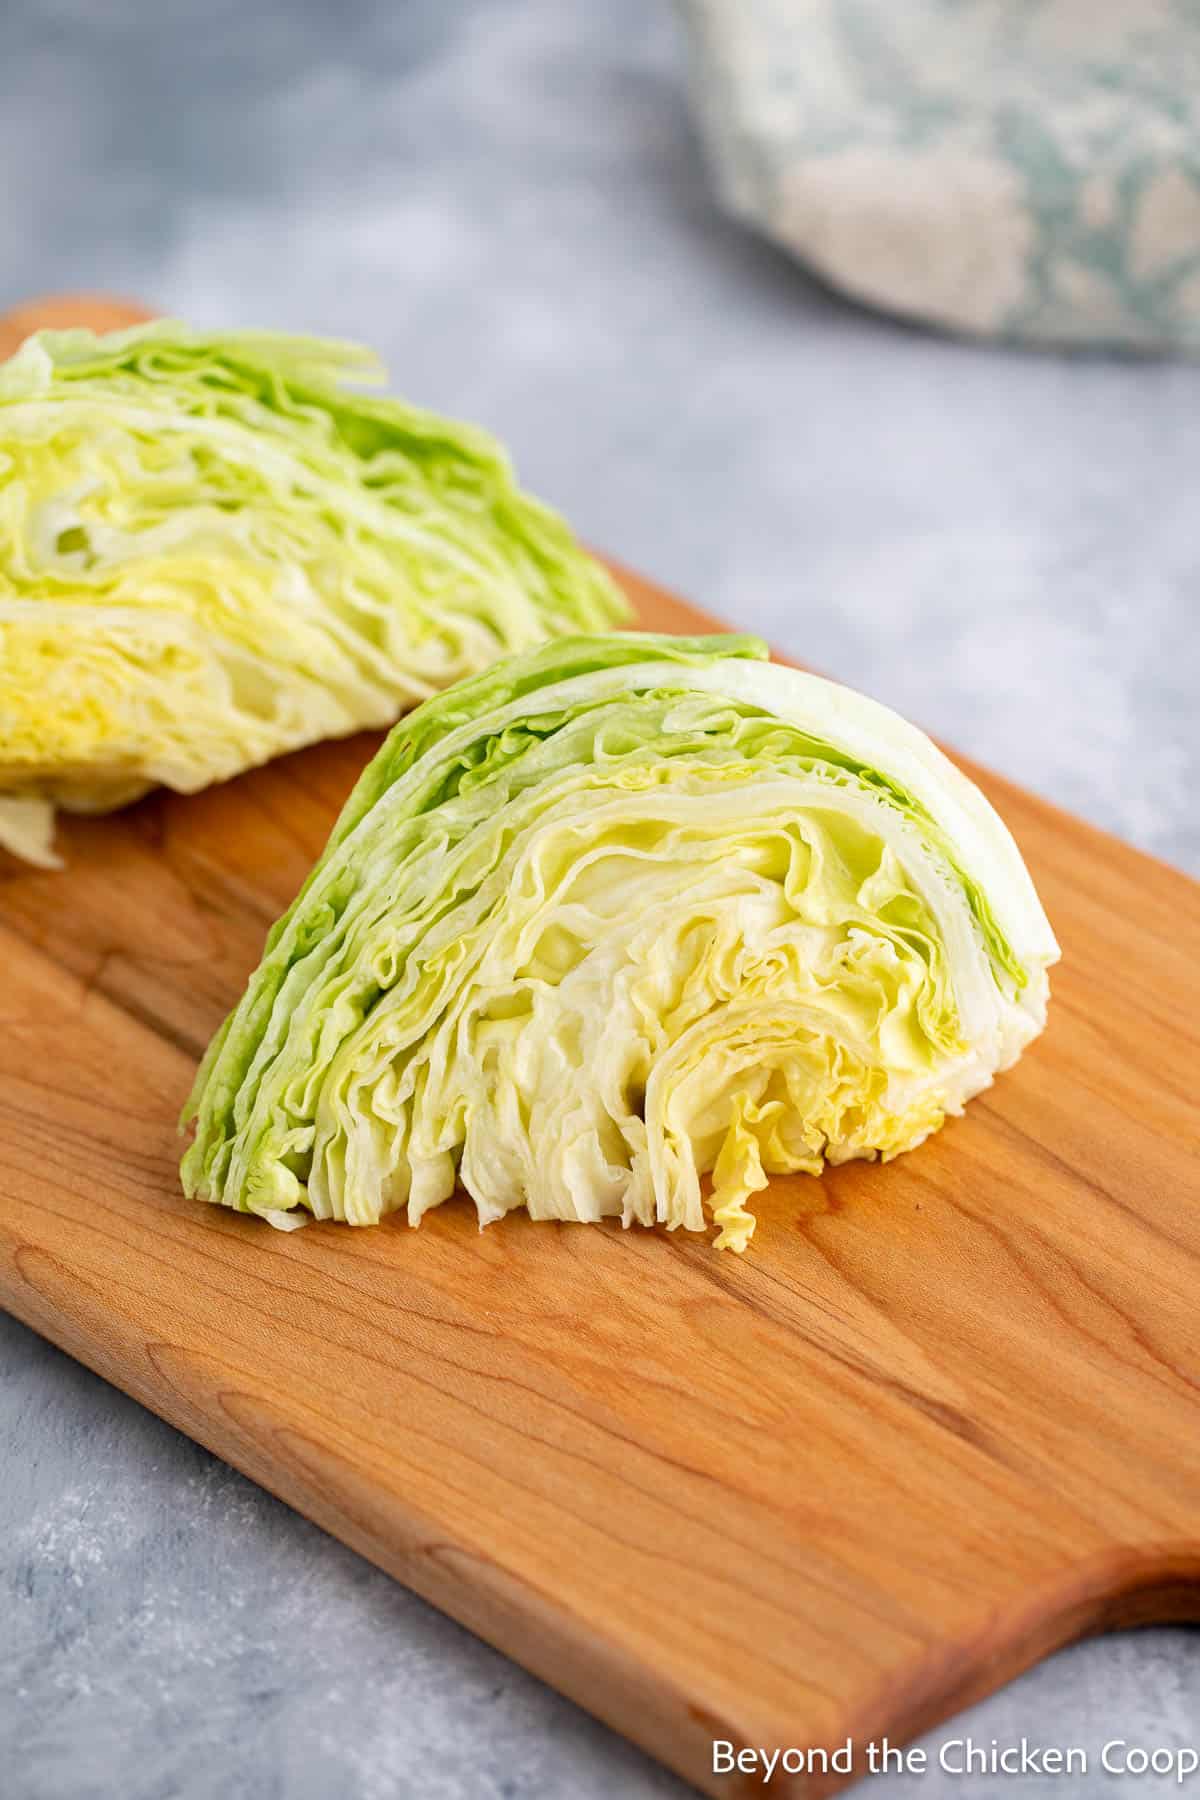 Wedges of iceberg lettuce on a cutting board. 